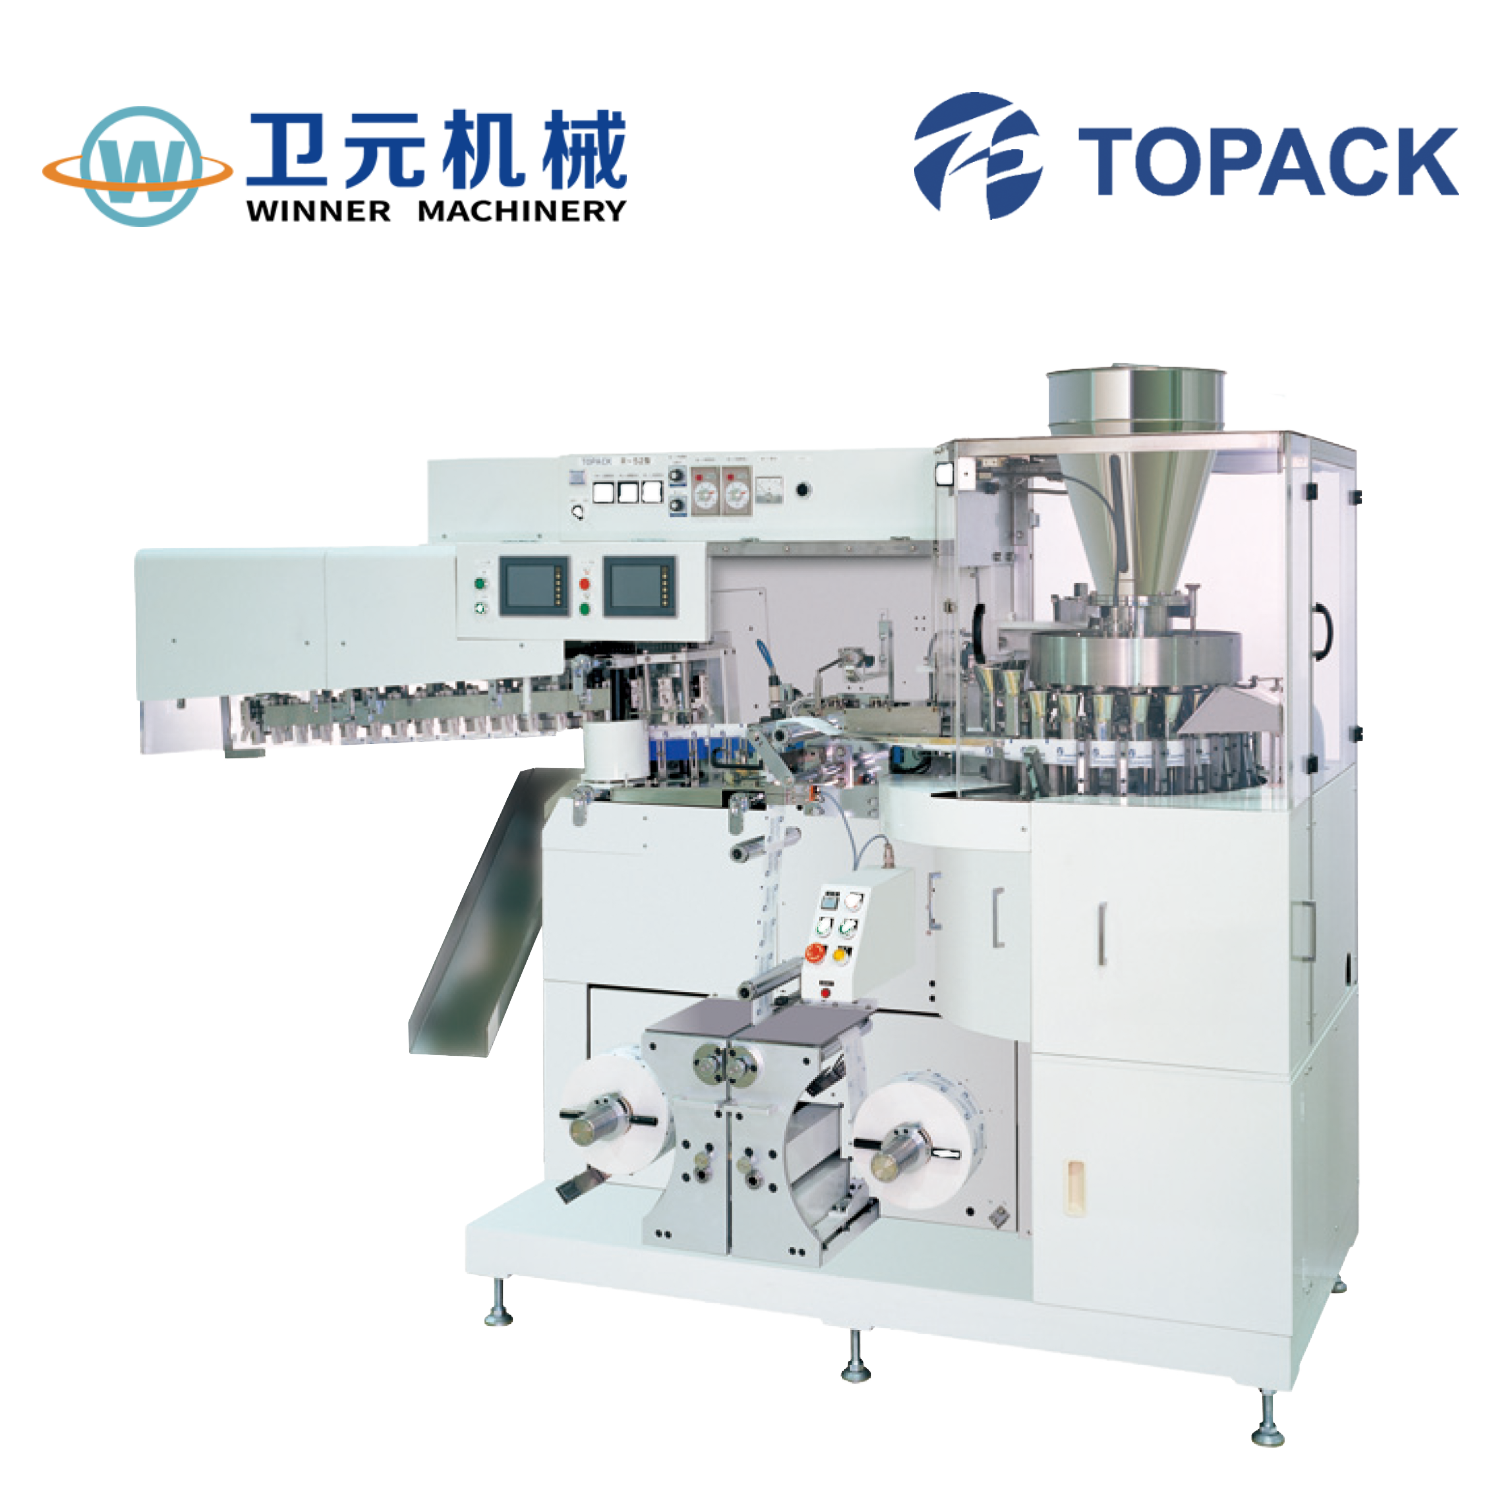 Topack Ultra high-speed Three-Side-Seal Pouch Forming, Filling and Packaging Machines